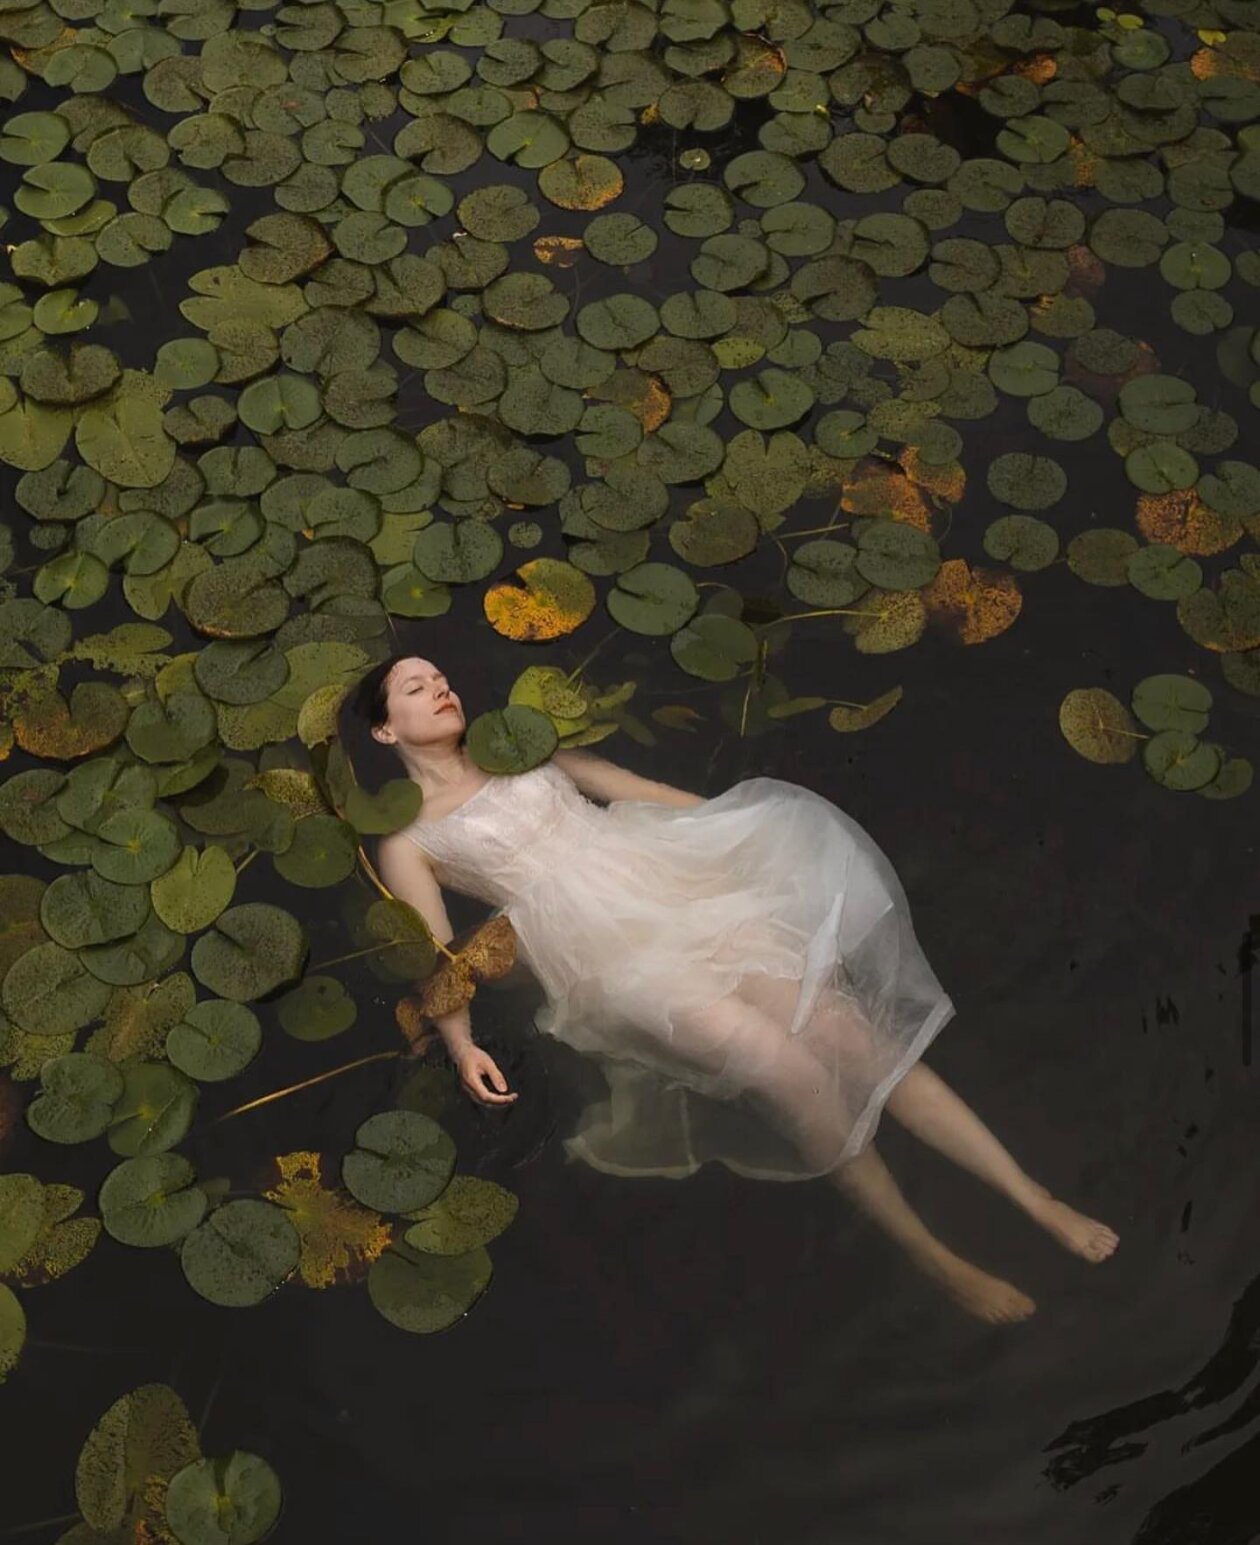 The Ethereal Female Photography Of Jenny Kaiser (14)